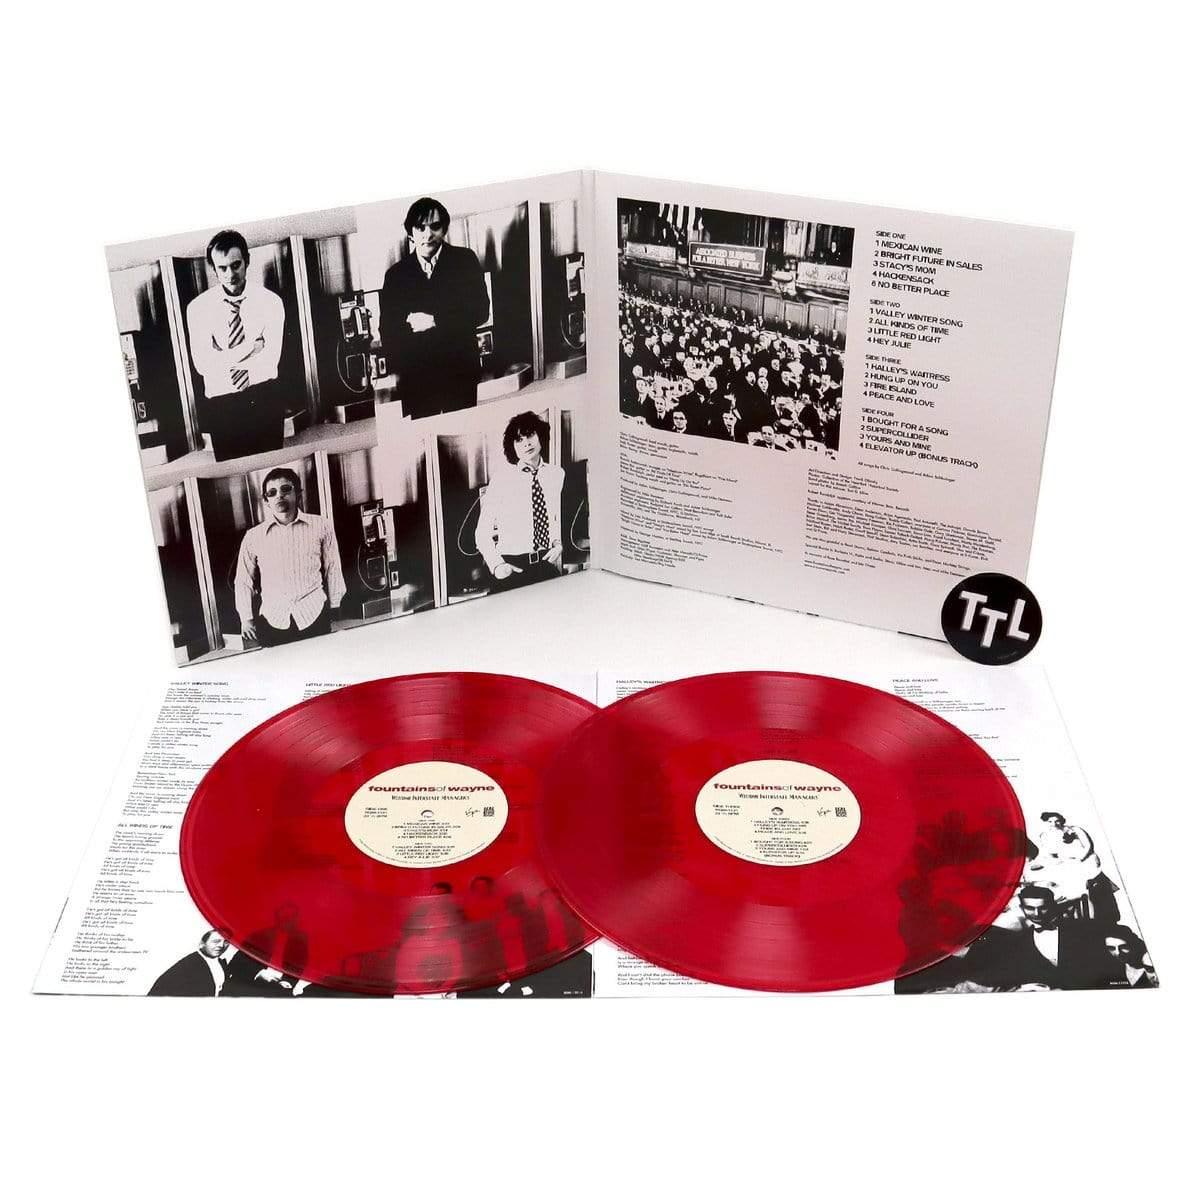 Fountains of Wayne - Welcome Interstate Managers (Limited Edition,  Gatefold, Red Vinyl) (2 LP)